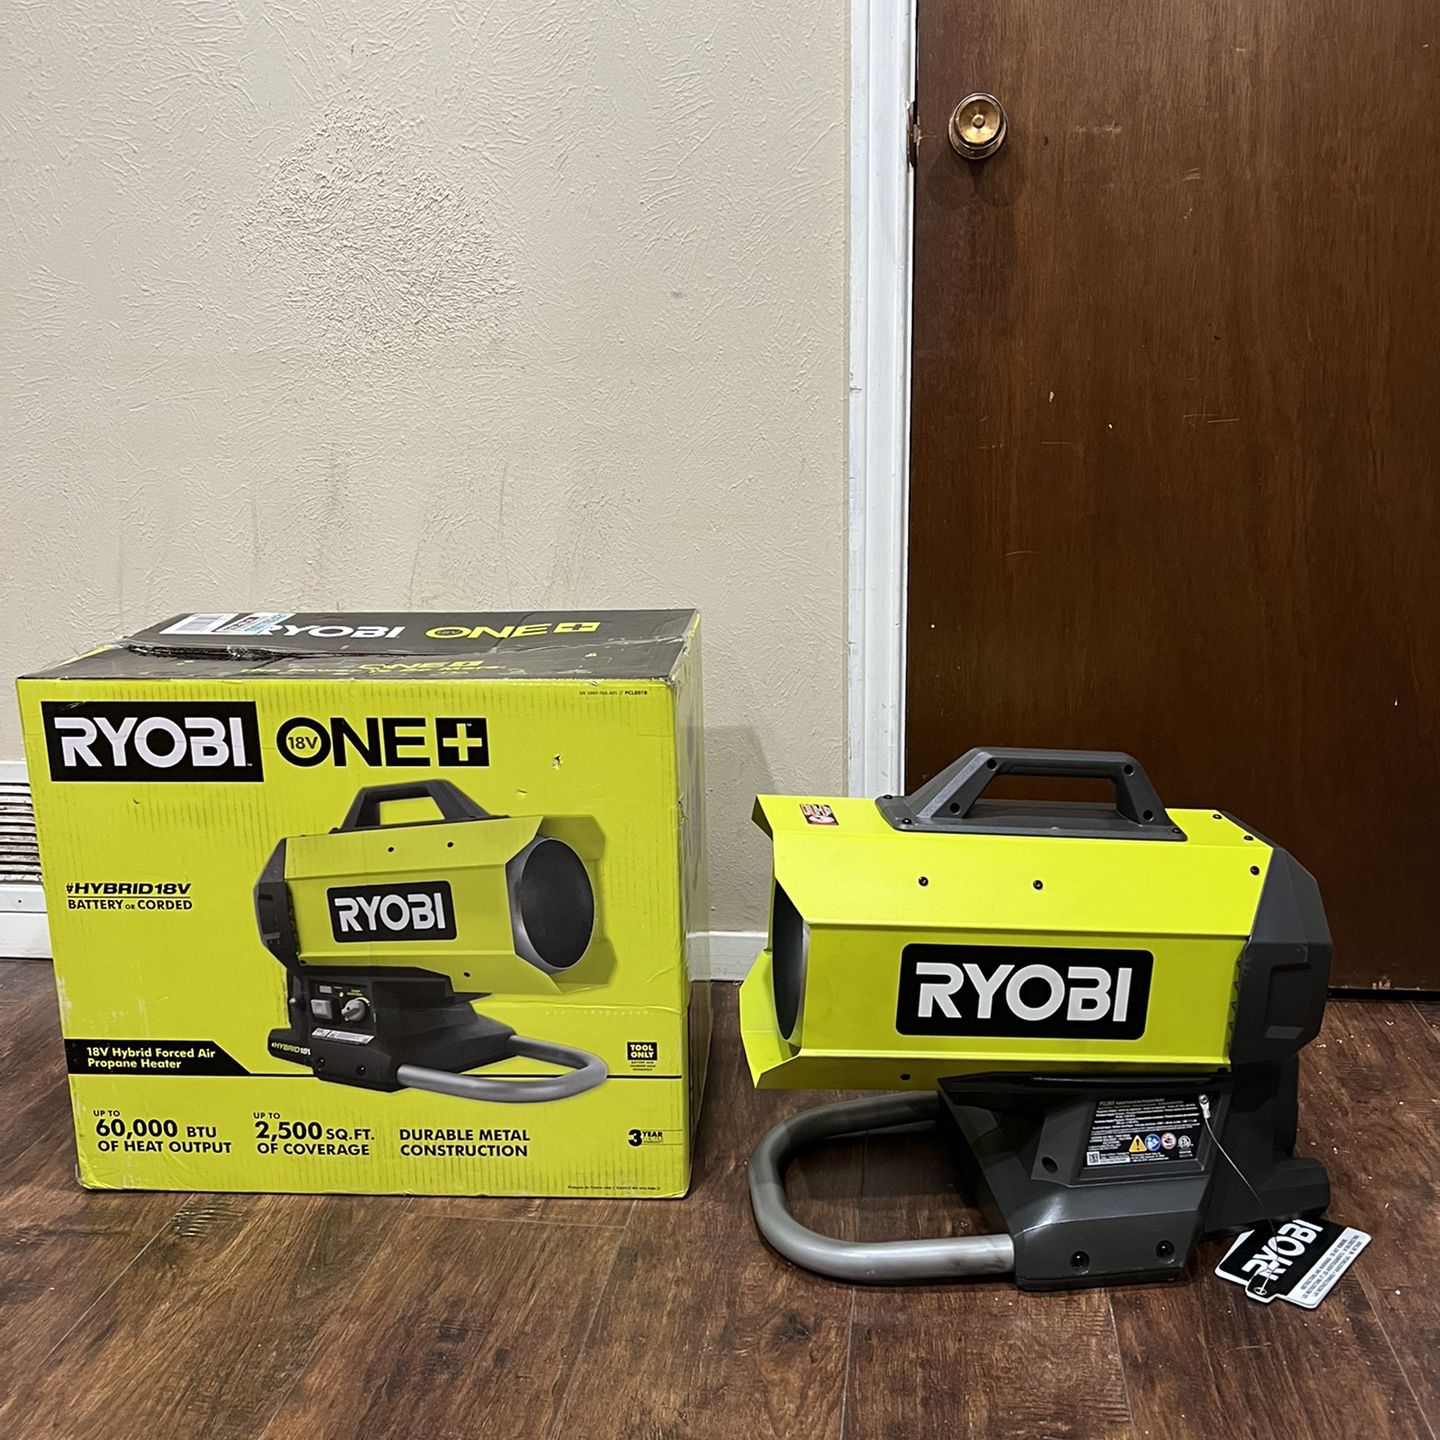 RYOBI ONE+ 18V Cordless Hybrid Forced Air Propane Heater (Tool Only) for  Sale in Duncanville, TX - OfferUp